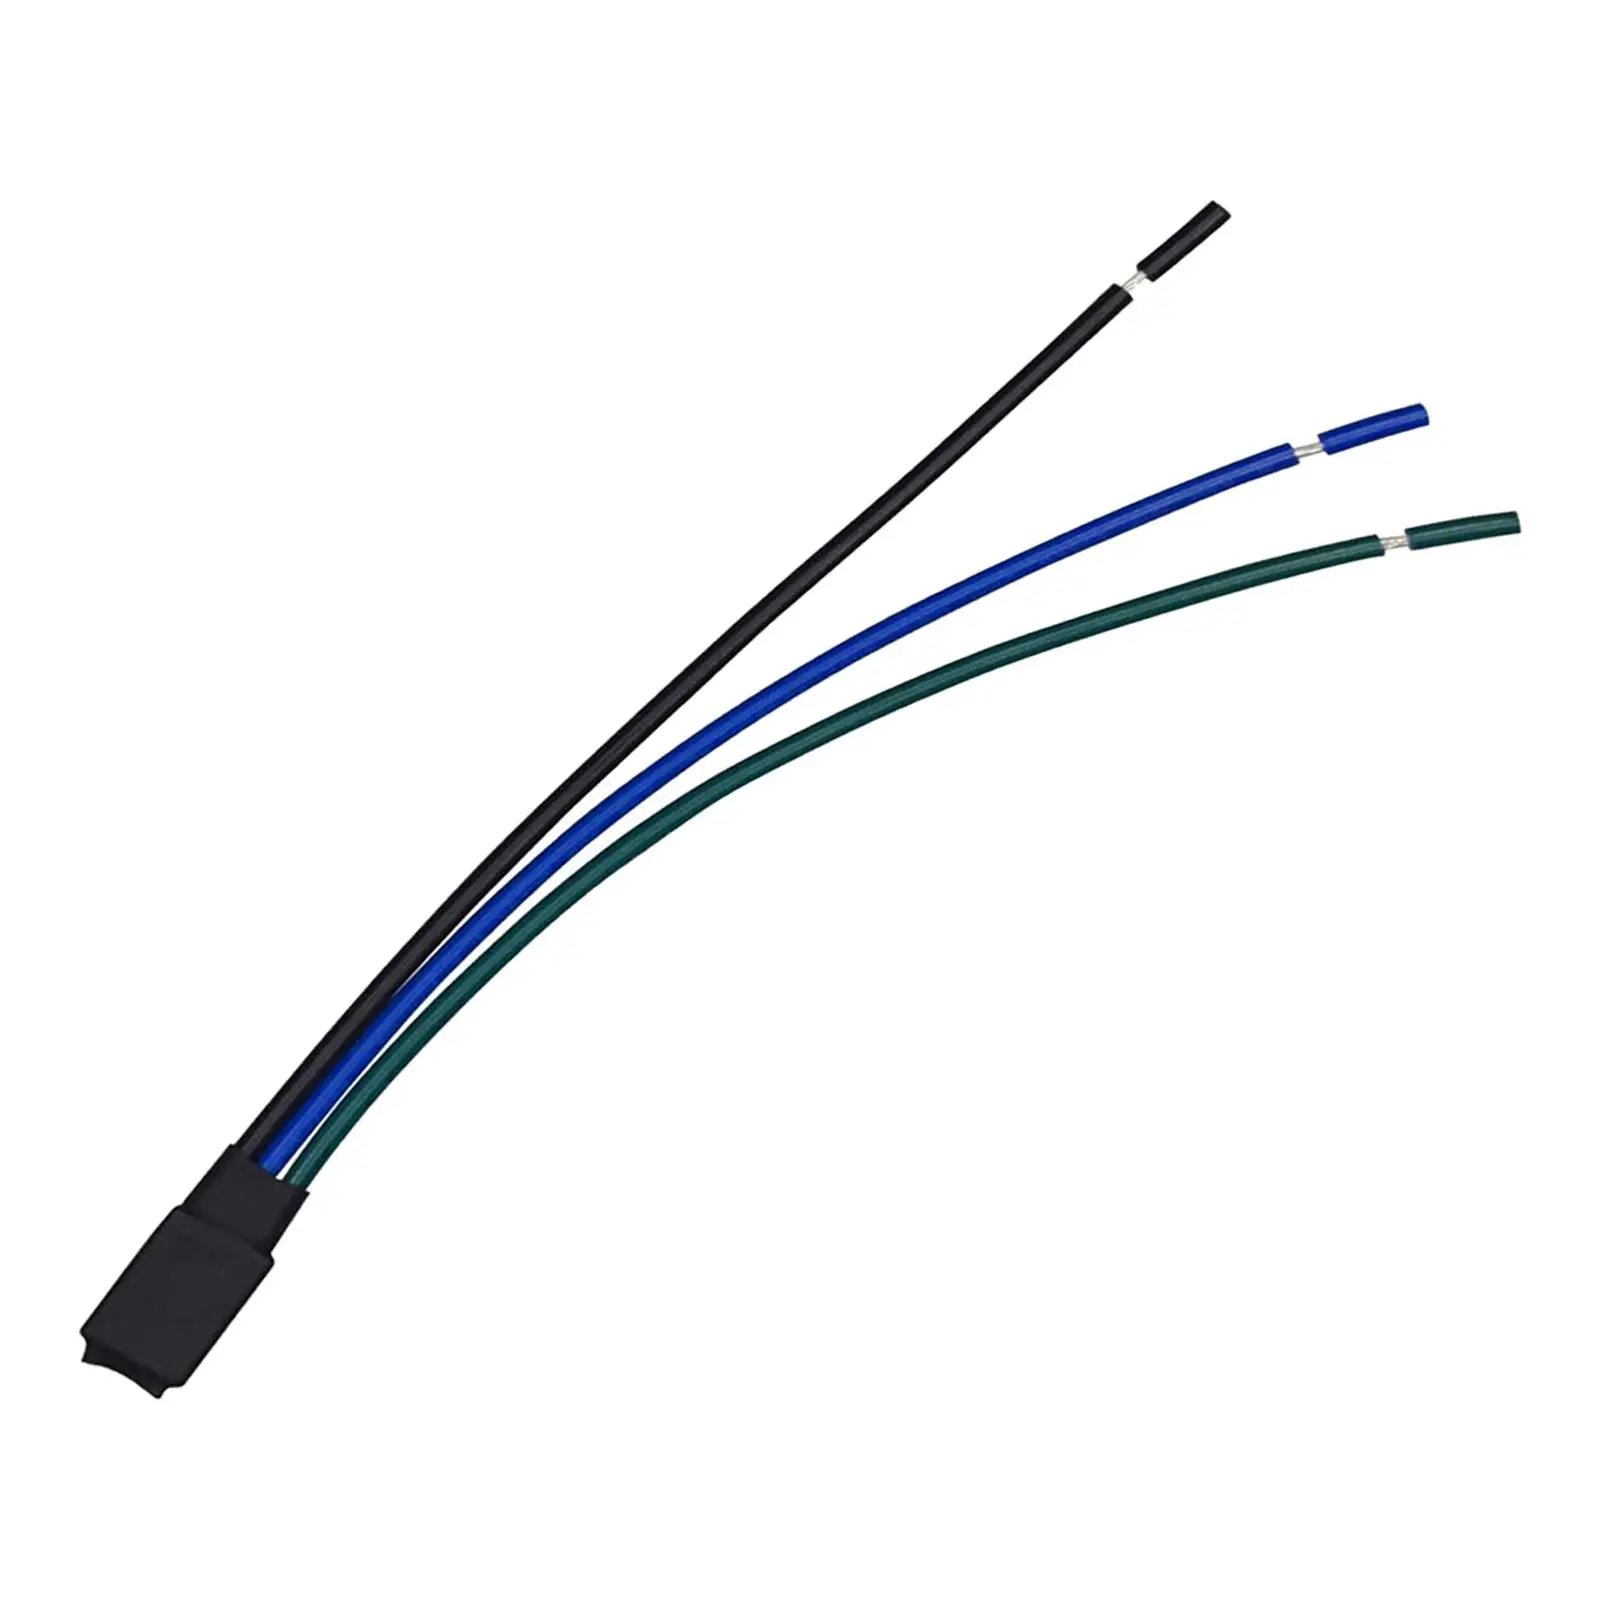 Auto Parking Brake Bypass Radio Wire Accessories Moulding Brake Bypass Wire Fit for Pioneer Avh Avh-P Avh-X in Motion Interface